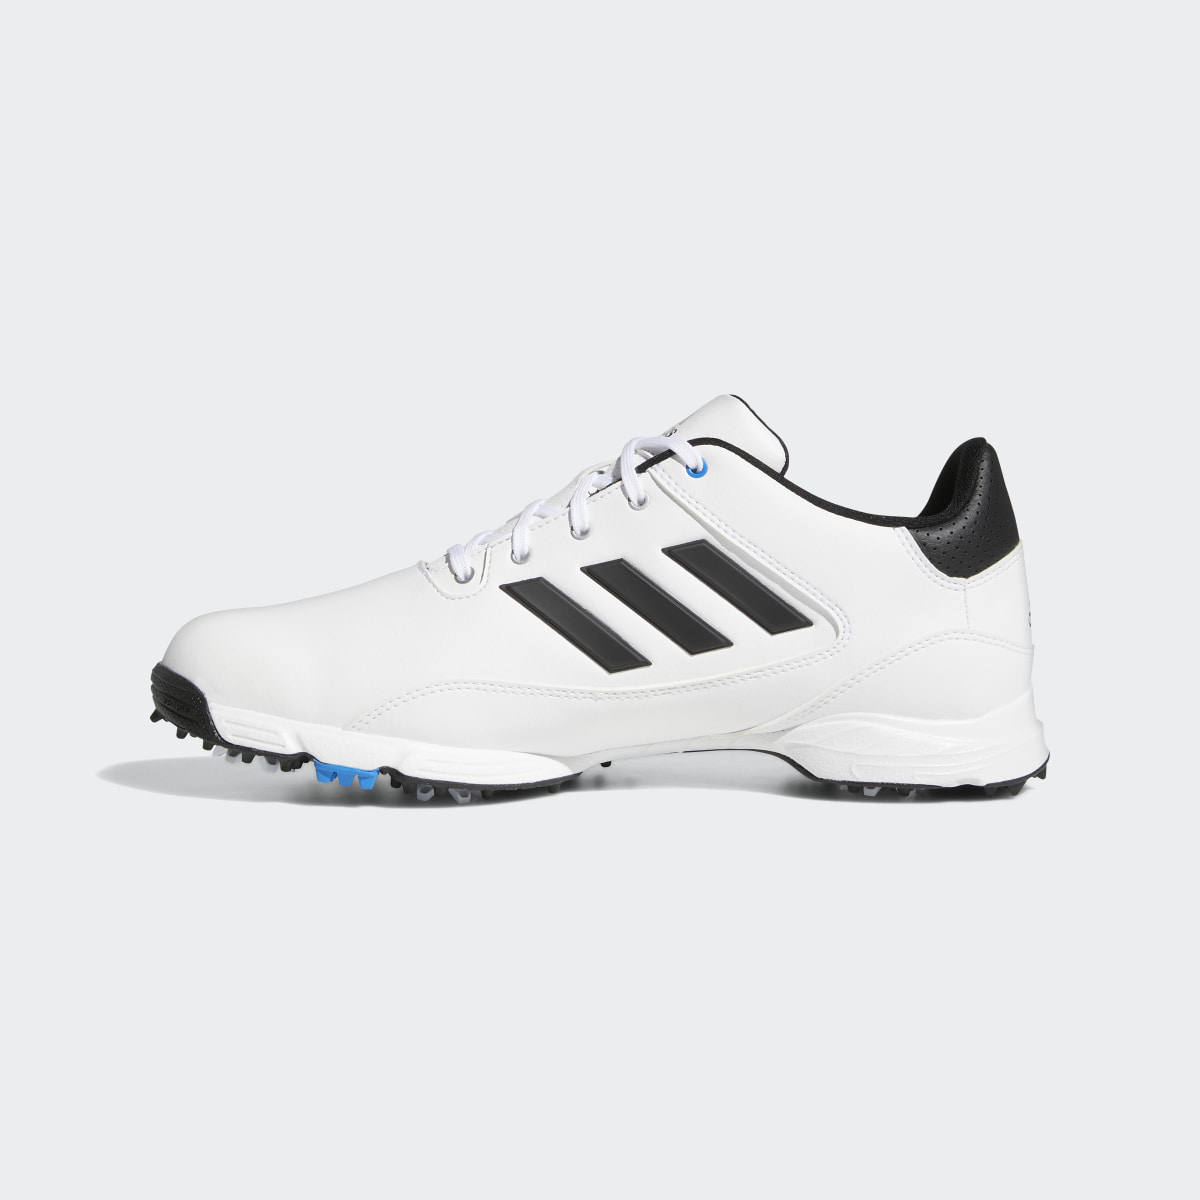 Adidas Golflite Max Wide Golf Shoes. 7